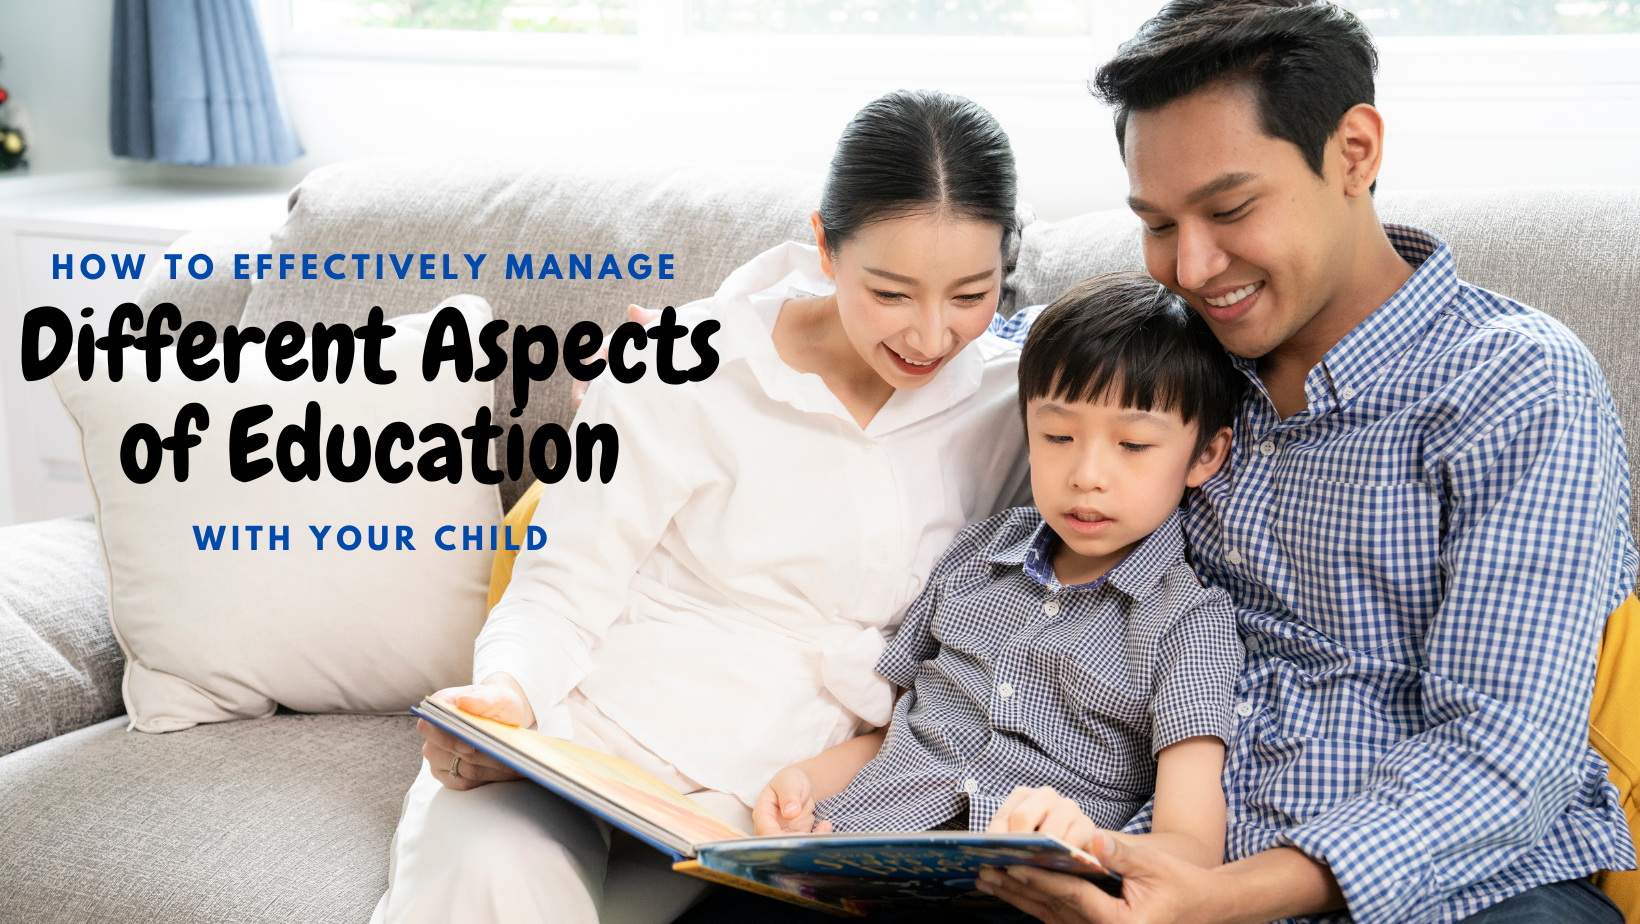 How to Effectively Manage Different Aspects of Education with Your Child.